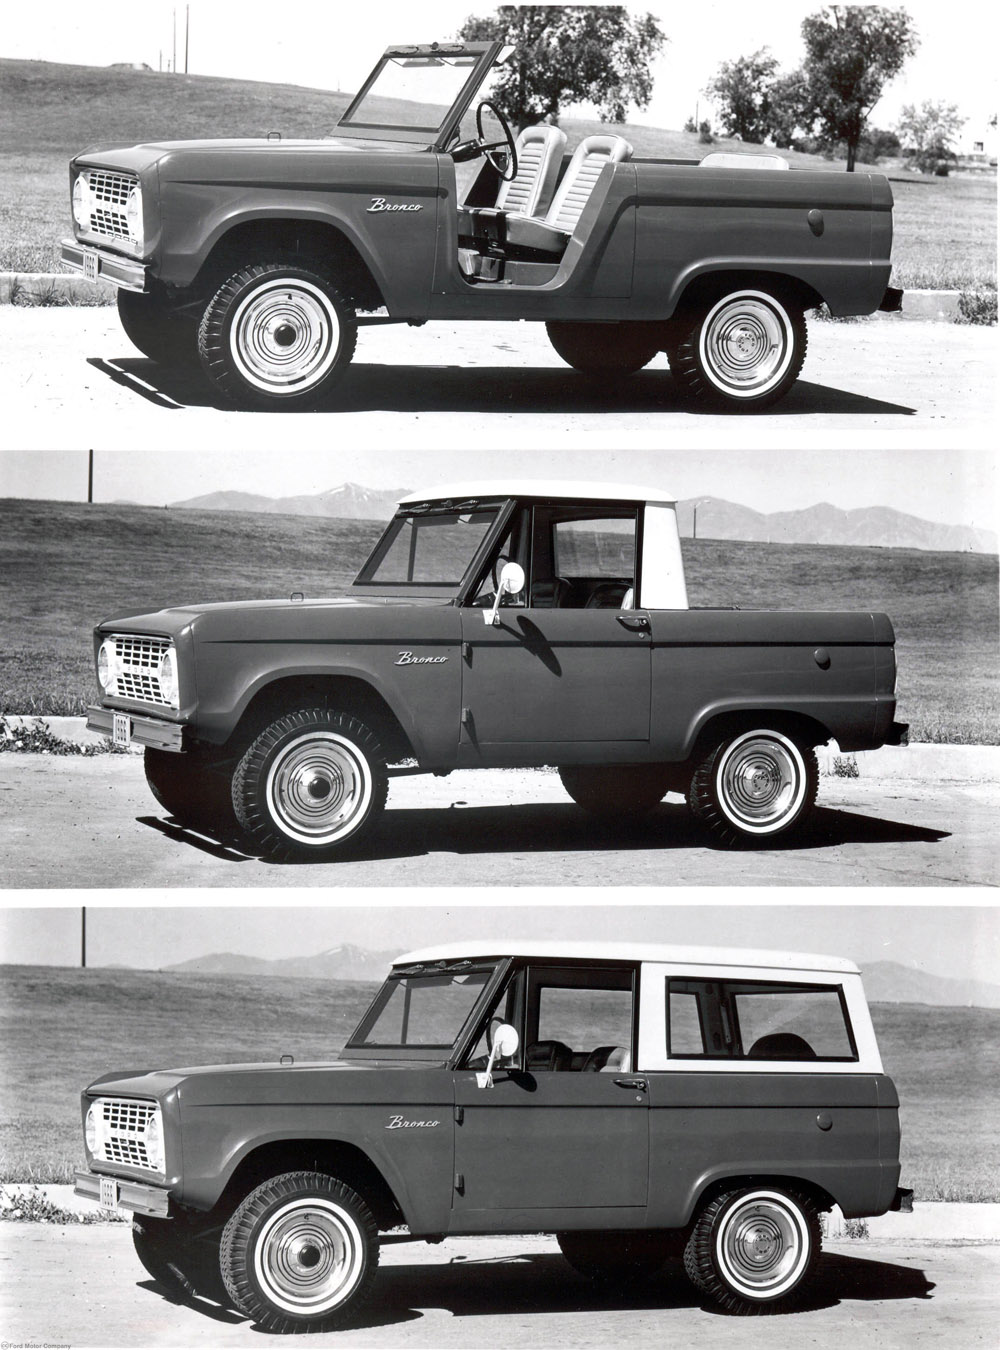 1966 Ford bronco history #7